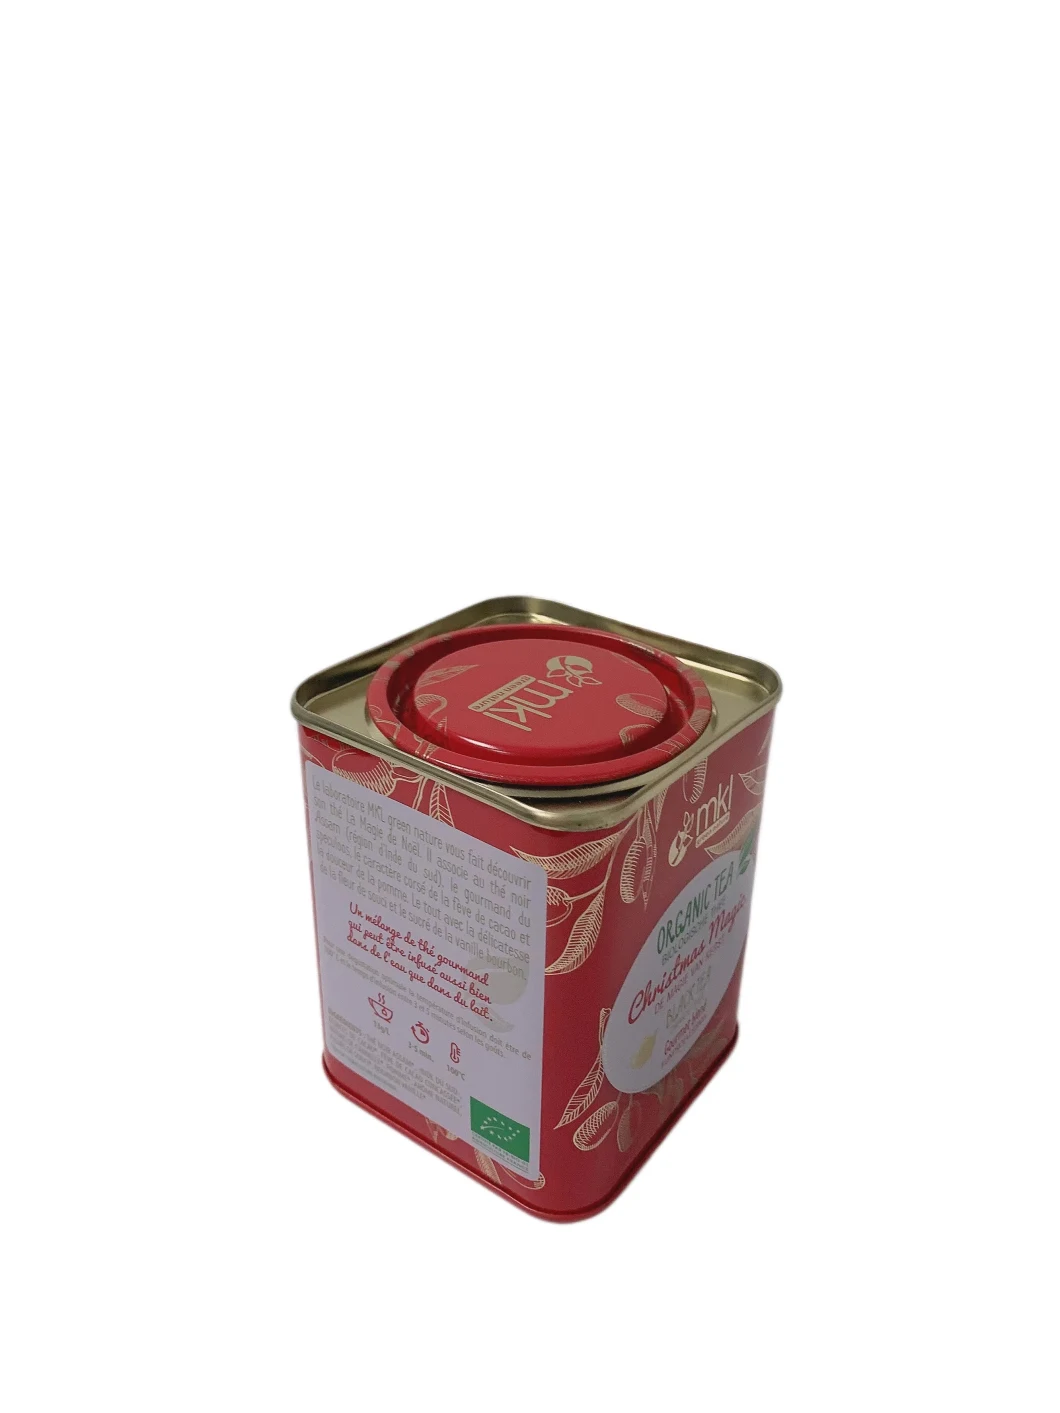 Hot Sale Square Shape Tea Tin Can Metal Gift Box with Press Lid Tin Tea Packaging for 100g Tea Packaging Tin Box